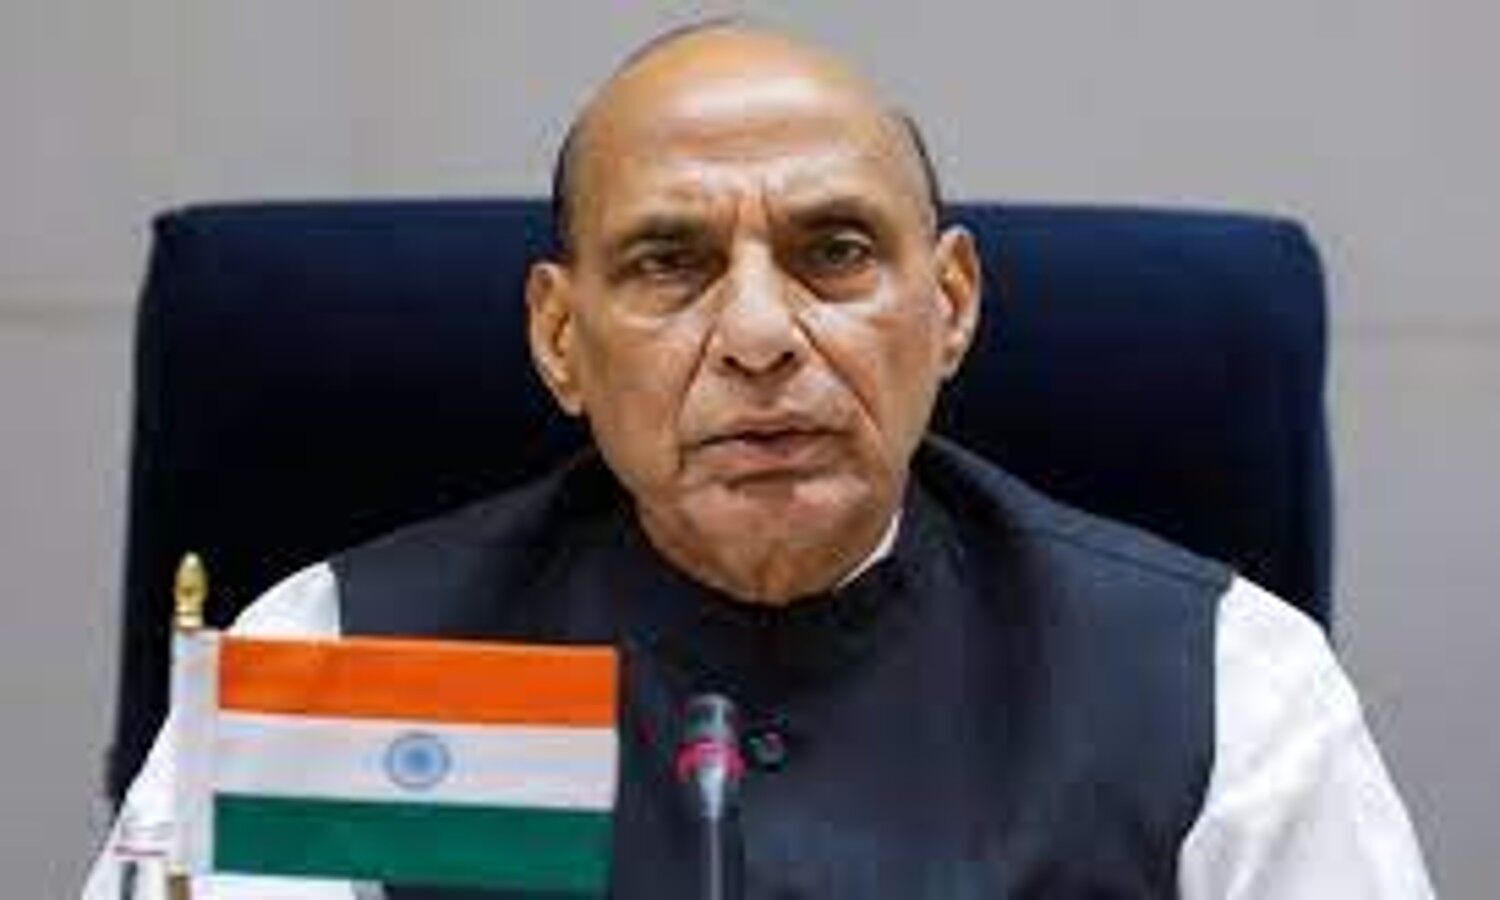 Drug Free India Campaign: Defense Minister Rajnath Singh administered oath to youth against drug abuse